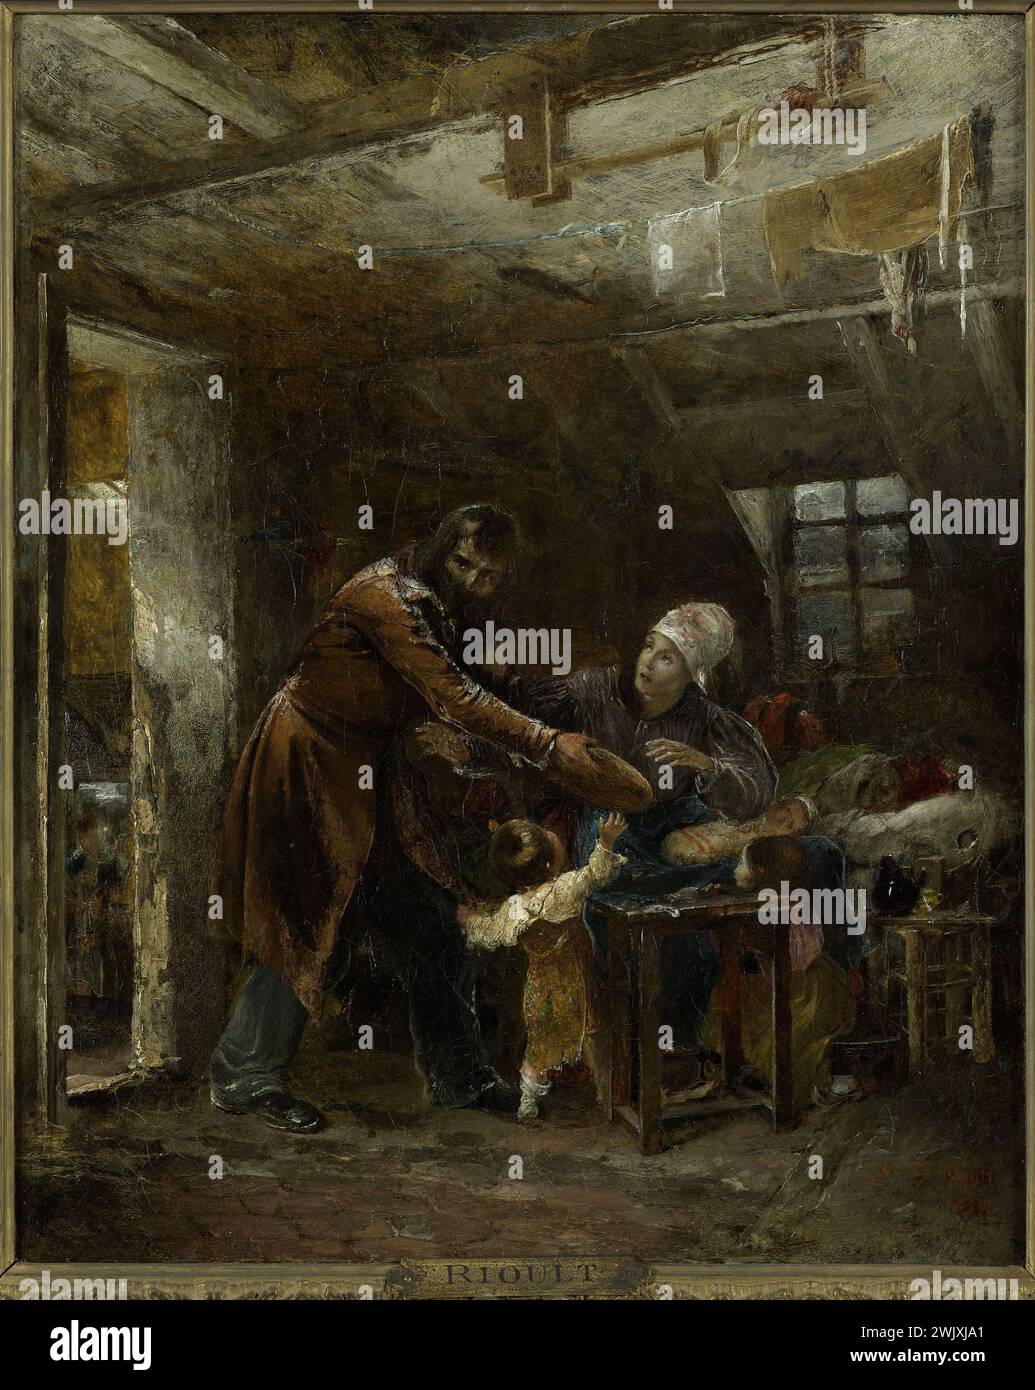 Louis-Edouard Rioult (1790-1855). 'Claude Gueux'. Oil on canvas, 1834. Paris, Victor Hugo's house. French writer, child, woman, man, illustration of literary work, misery, bread, death penalty, character, prisoner, novel, 19th 19th 19th 19th 19th 19th 19th century, oil on canvas Stock Photo